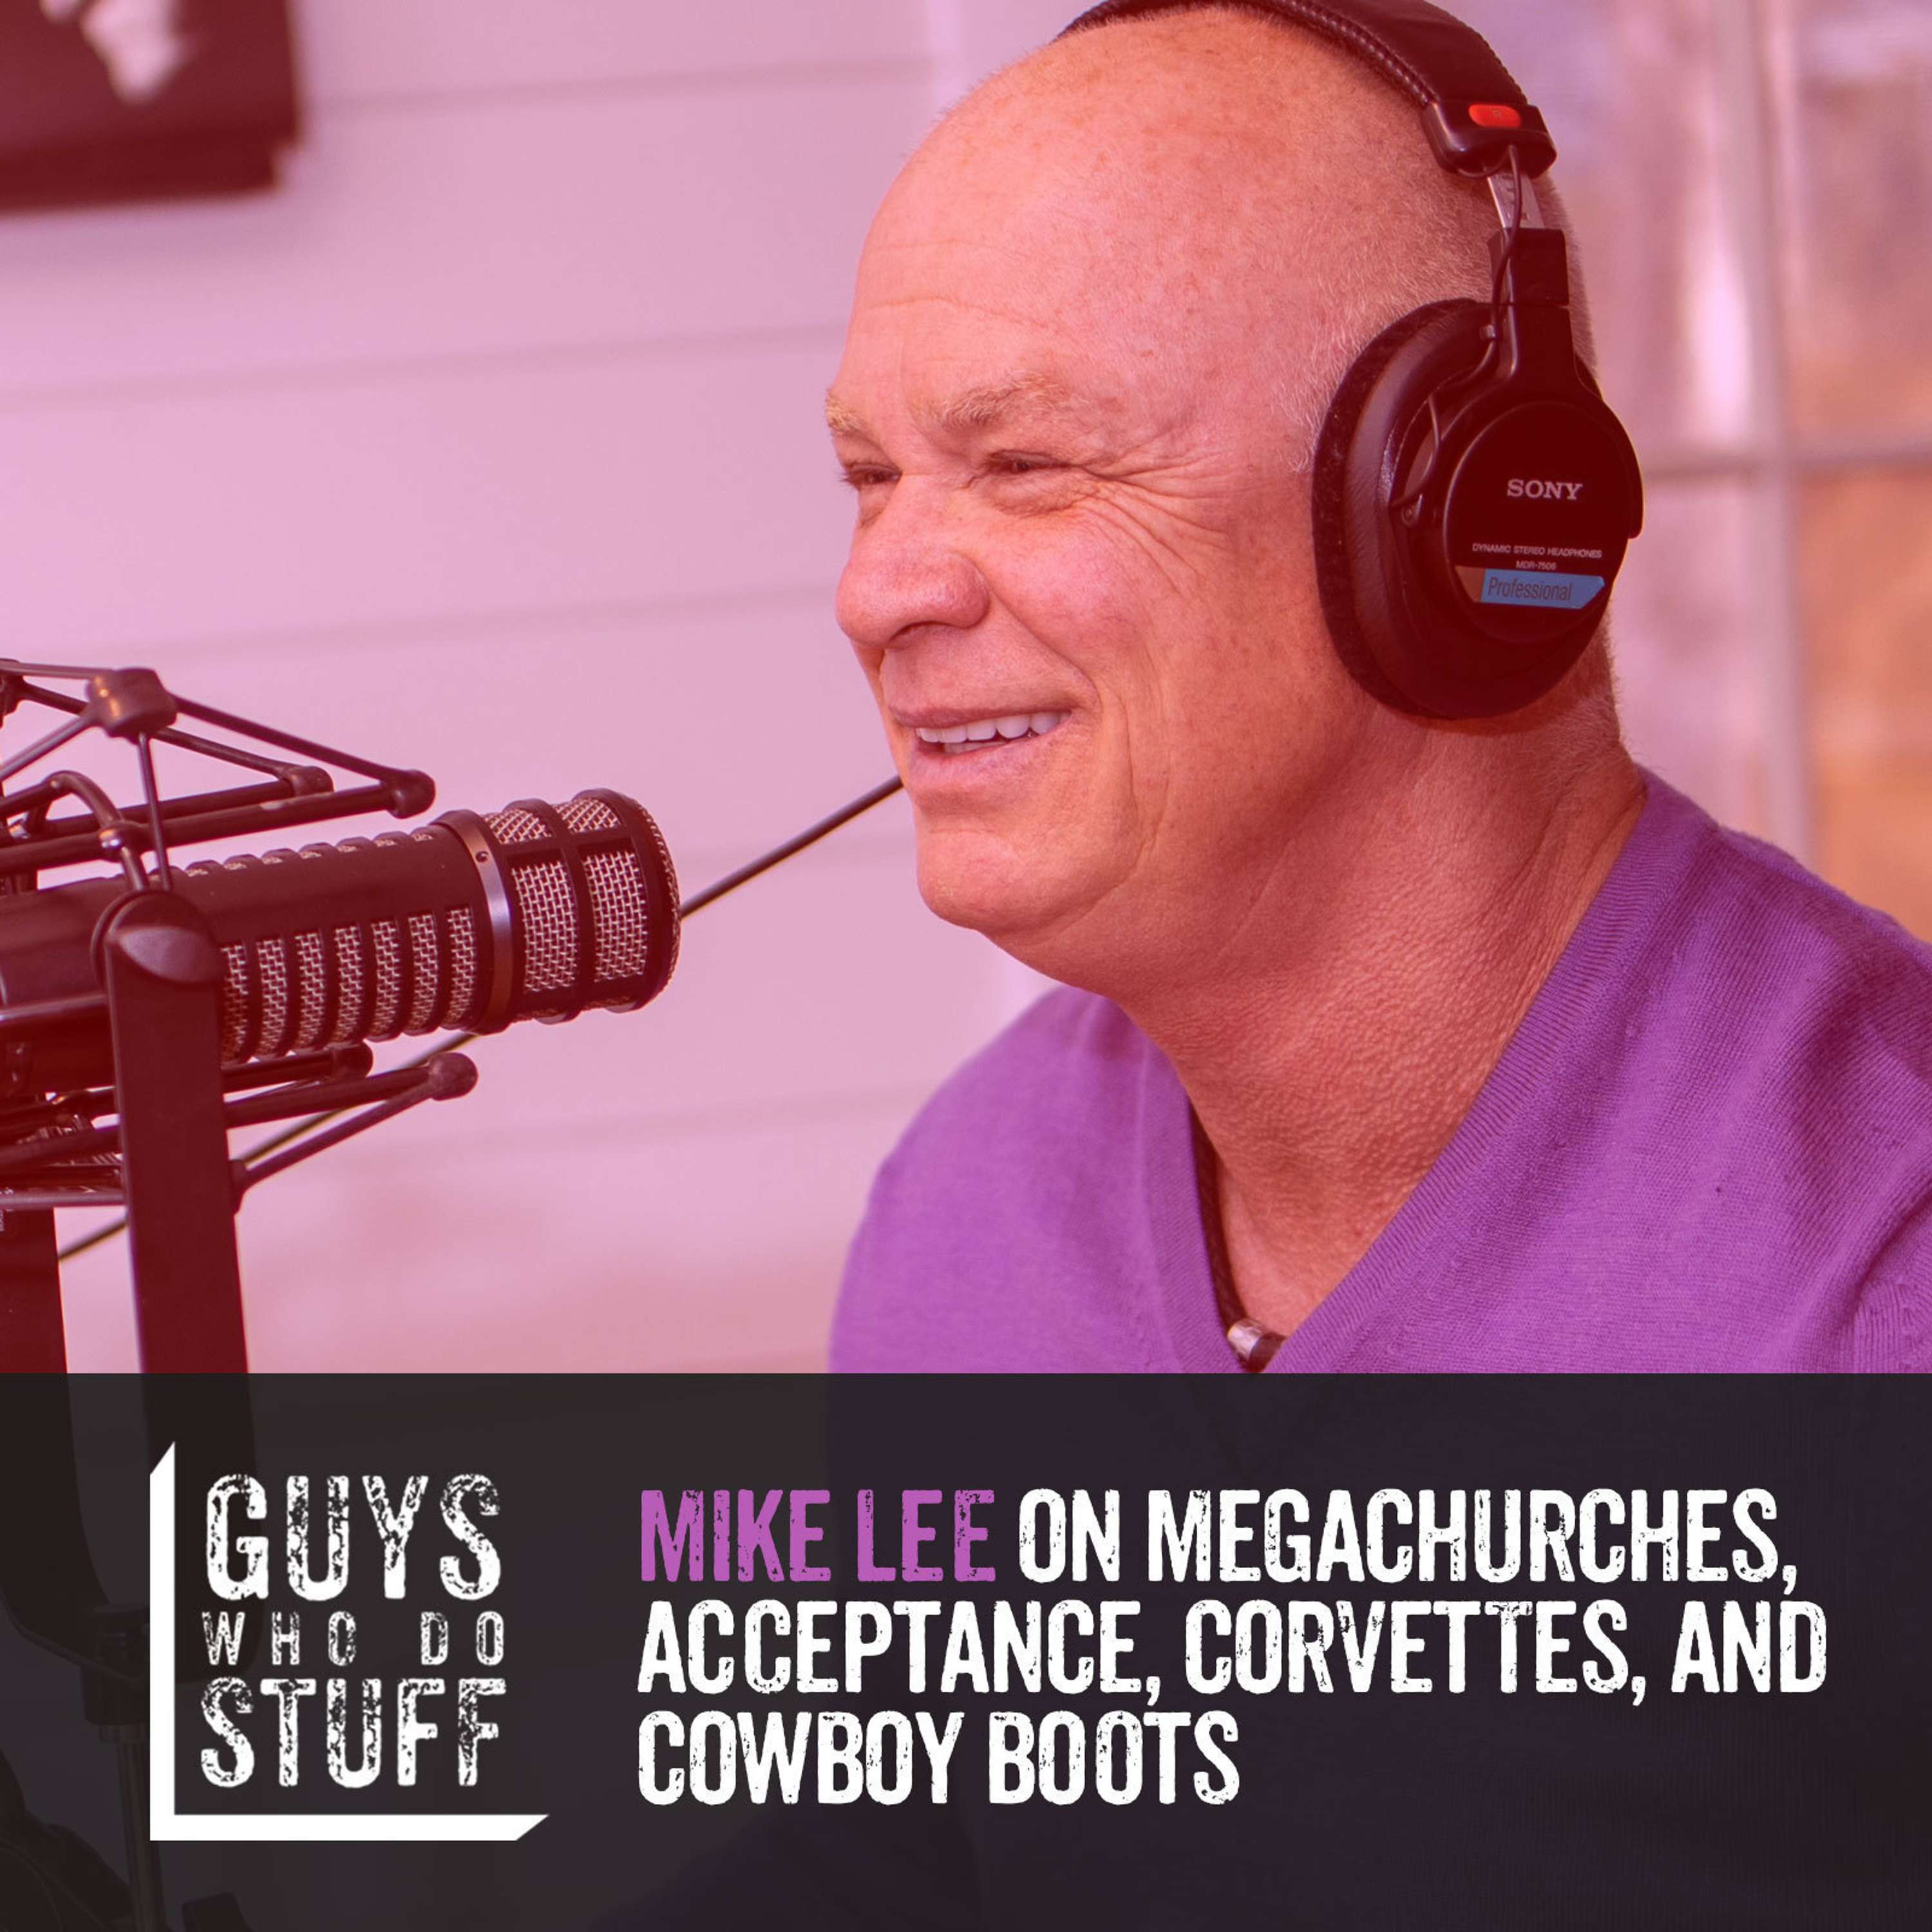 Mike Lee on Megachurches, acceptance, corvettes, and cowboy boots